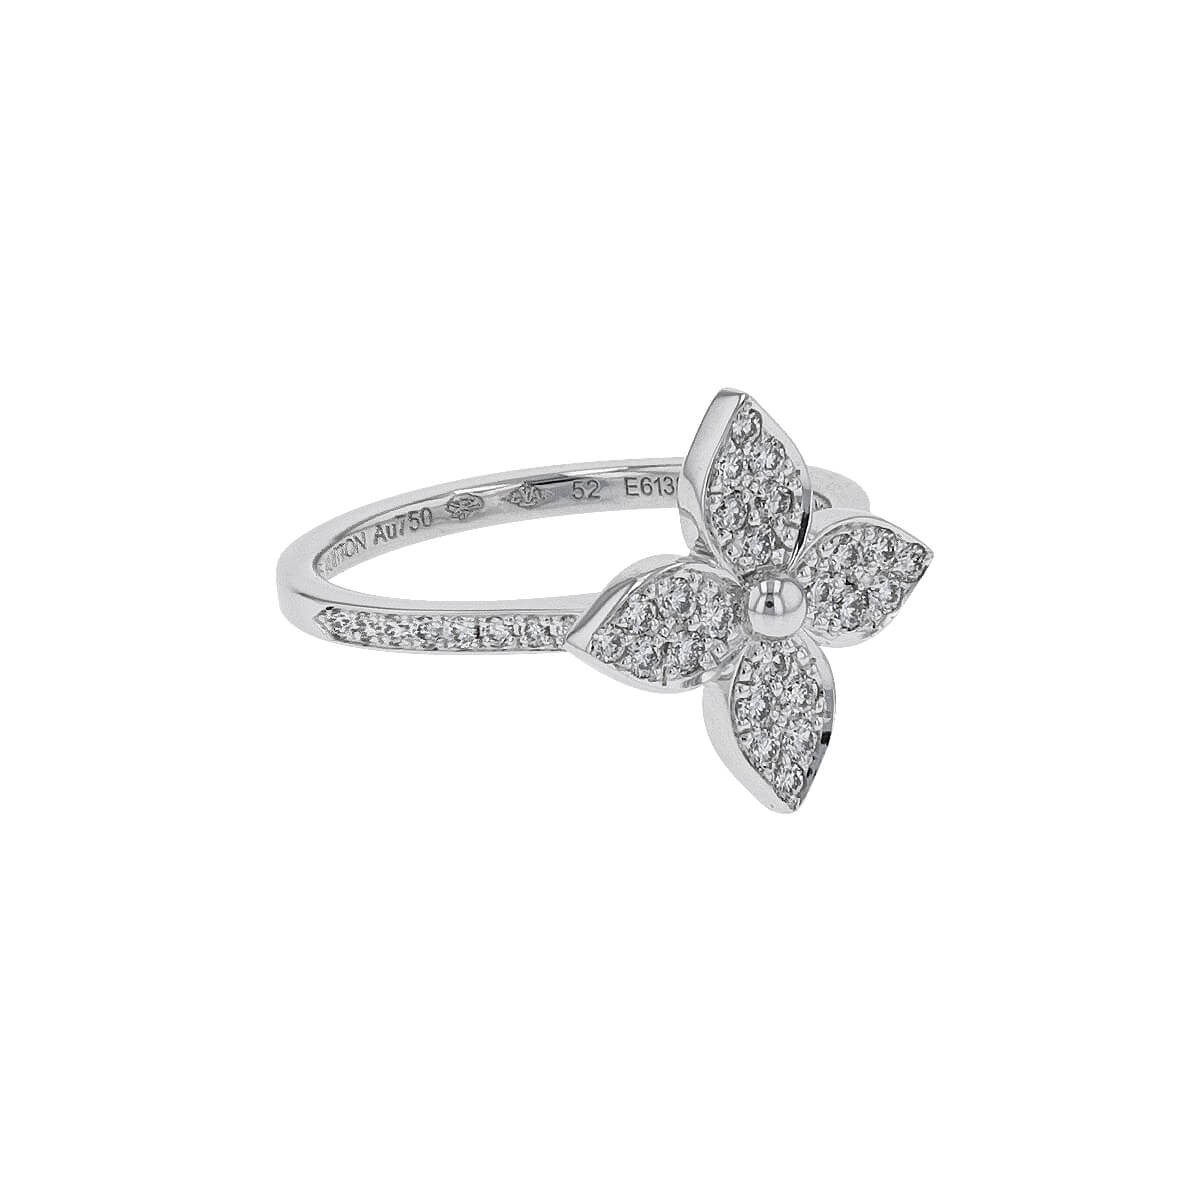 Louis Vuitton Star Blossom Ring, White Gold and Diamonds Grey. Size 52